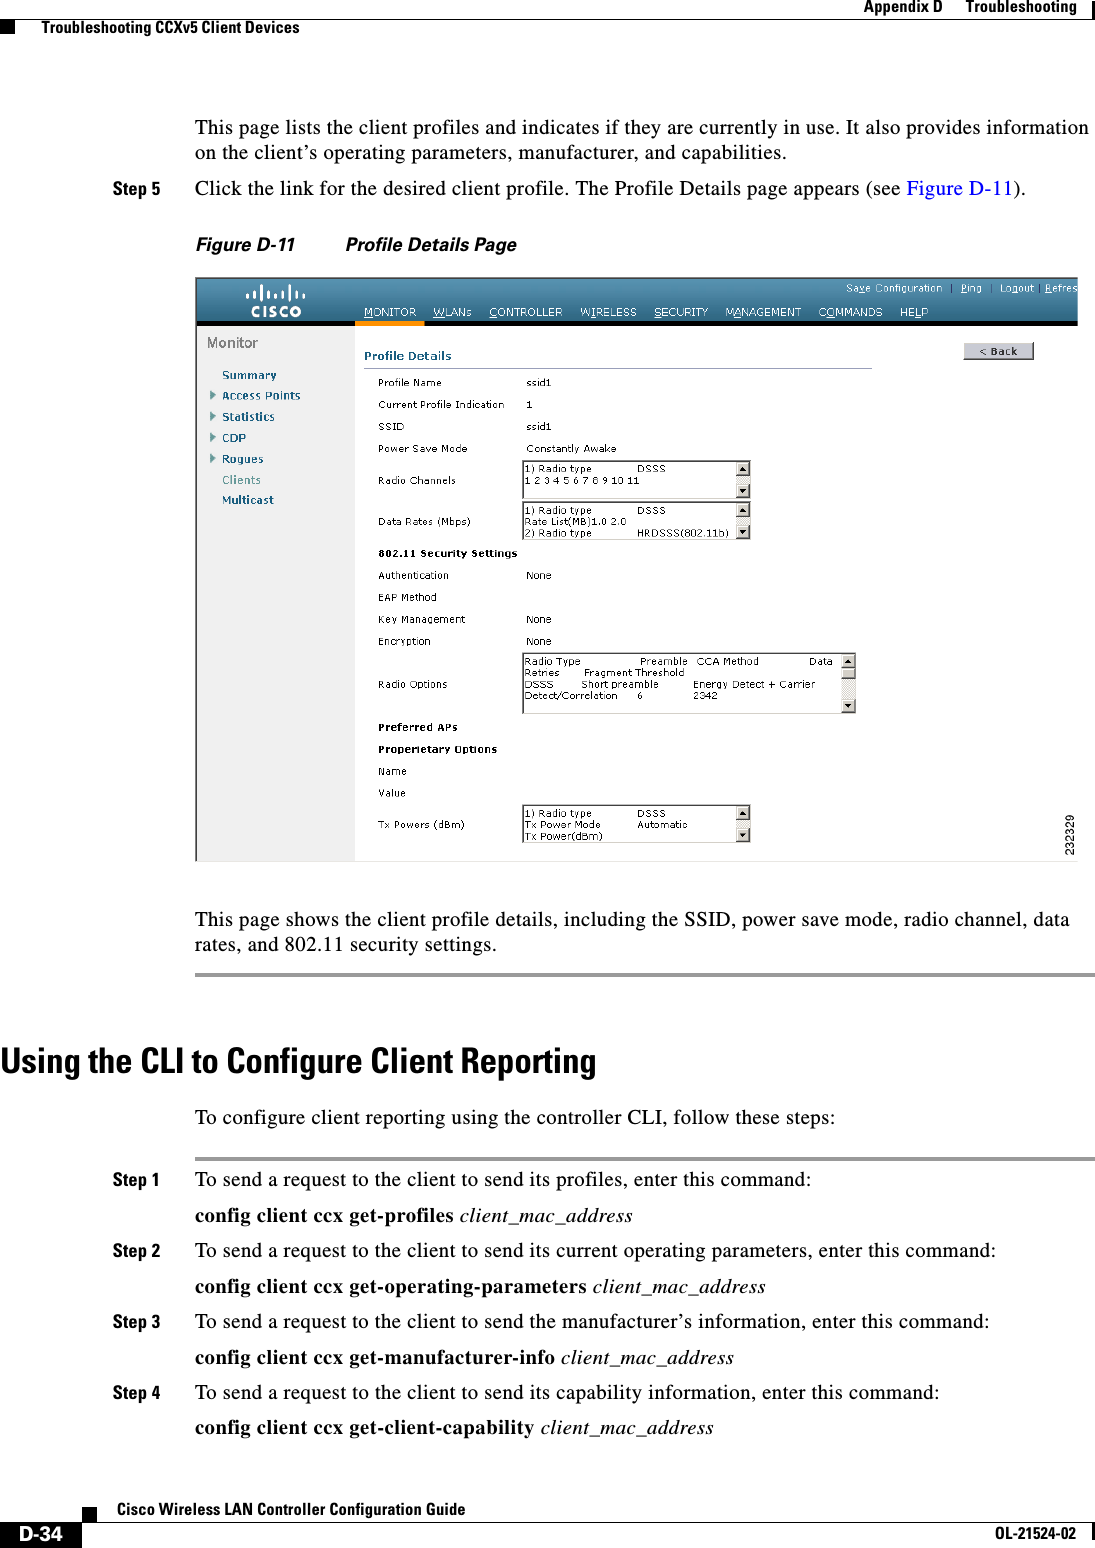  D-34Cisco Wireless LAN Controller Configuration GuideOL-21524-02Appendix D      Troubleshooting  Troubleshooting CCXv5 Client DevicesThis page lists the client profiles and indicates if they are currently in use. It also provides information on the client’s operating parameters, manufacturer, and capabilities.Step 5 Click the link for the desired client profile. The Profile Details page appears (see Figure D-11).Figure D-11 Profile Details PageThis page shows the client profile details, including the SSID, power save mode, radio channel, data rates, and 802.11 security settings.Using the CLI to Configure Client ReportingTo configure client reporting using the controller CLI, follow these steps:Step 1 To send a request to the client to send its profiles, enter this command:config client ccx get-profiles client_mac_addressStep 2 To send a request to the client to send its current operating parameters, enter this command:config client ccx get-operating-parameters client_mac_addressStep 3 To send a request to the client to send the manufacturer’s information, enter this command:config client ccx get-manufacturer-info client_mac_addressStep 4 To send a request to the client to send its capability information, enter this command:config client ccx get-client-capability client_mac_address